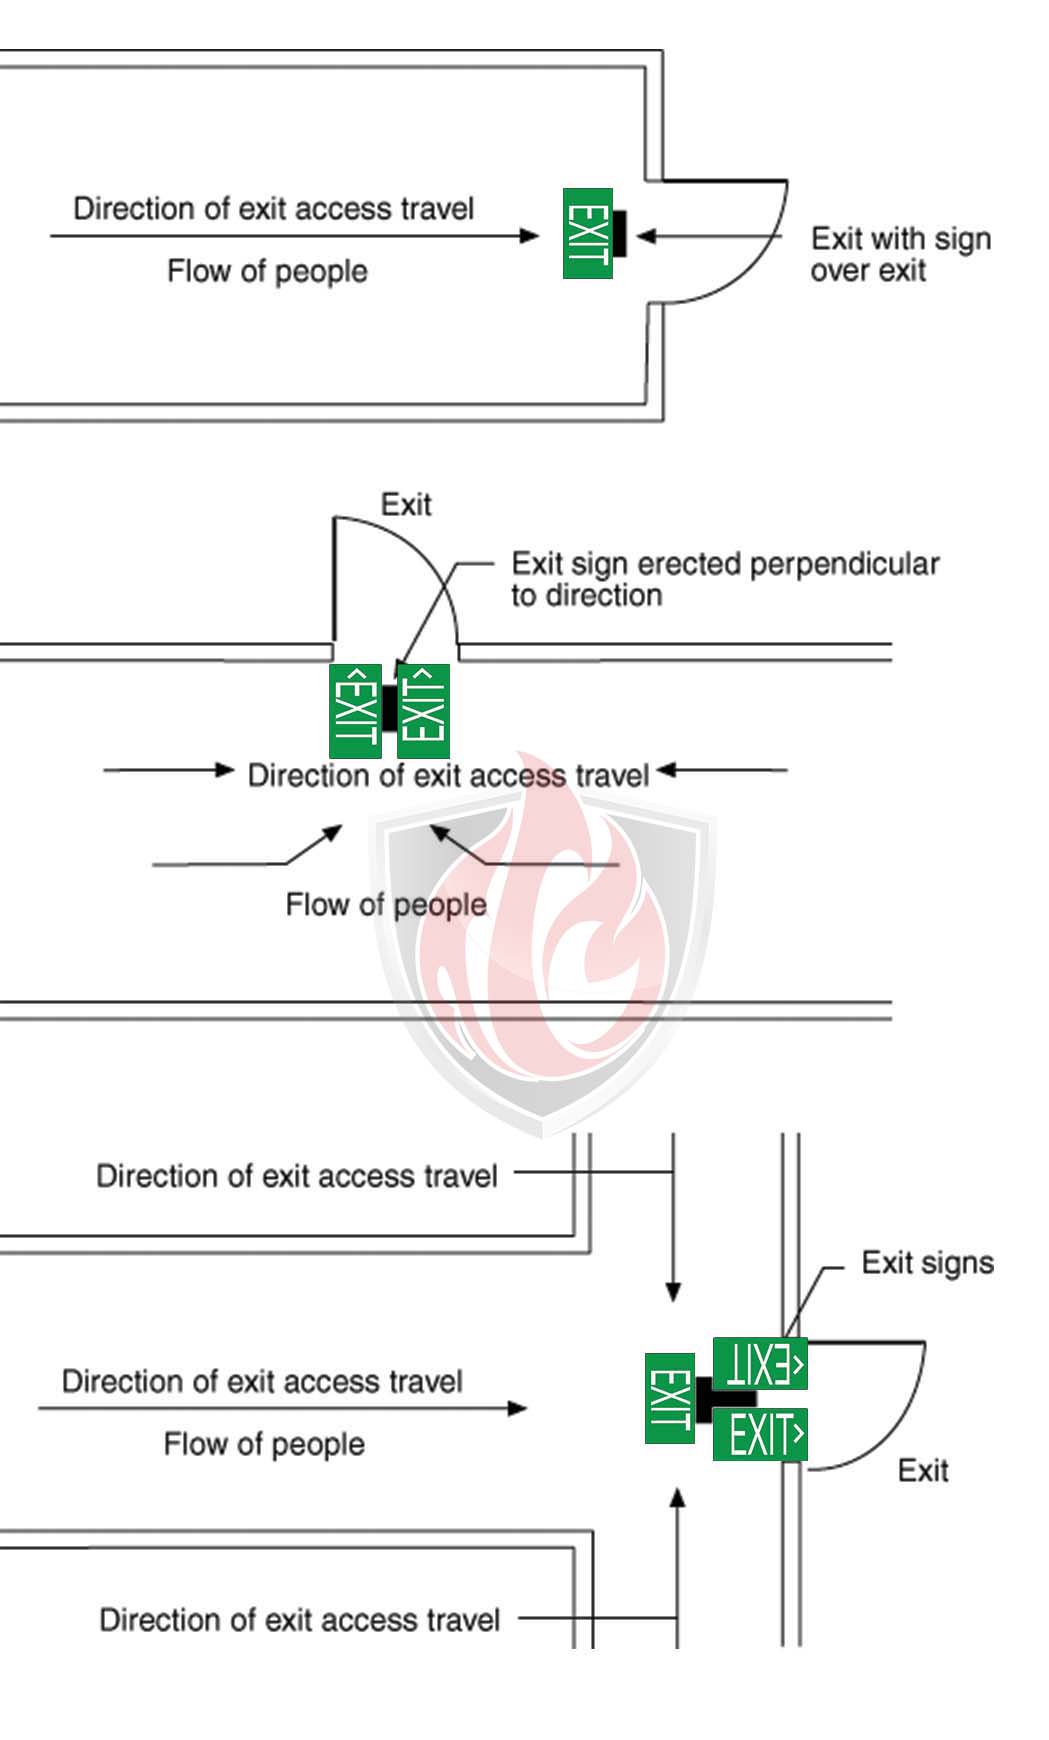 PHOTOLUMINECEST EXIT SIGNS - NUKE SIGNS CHART